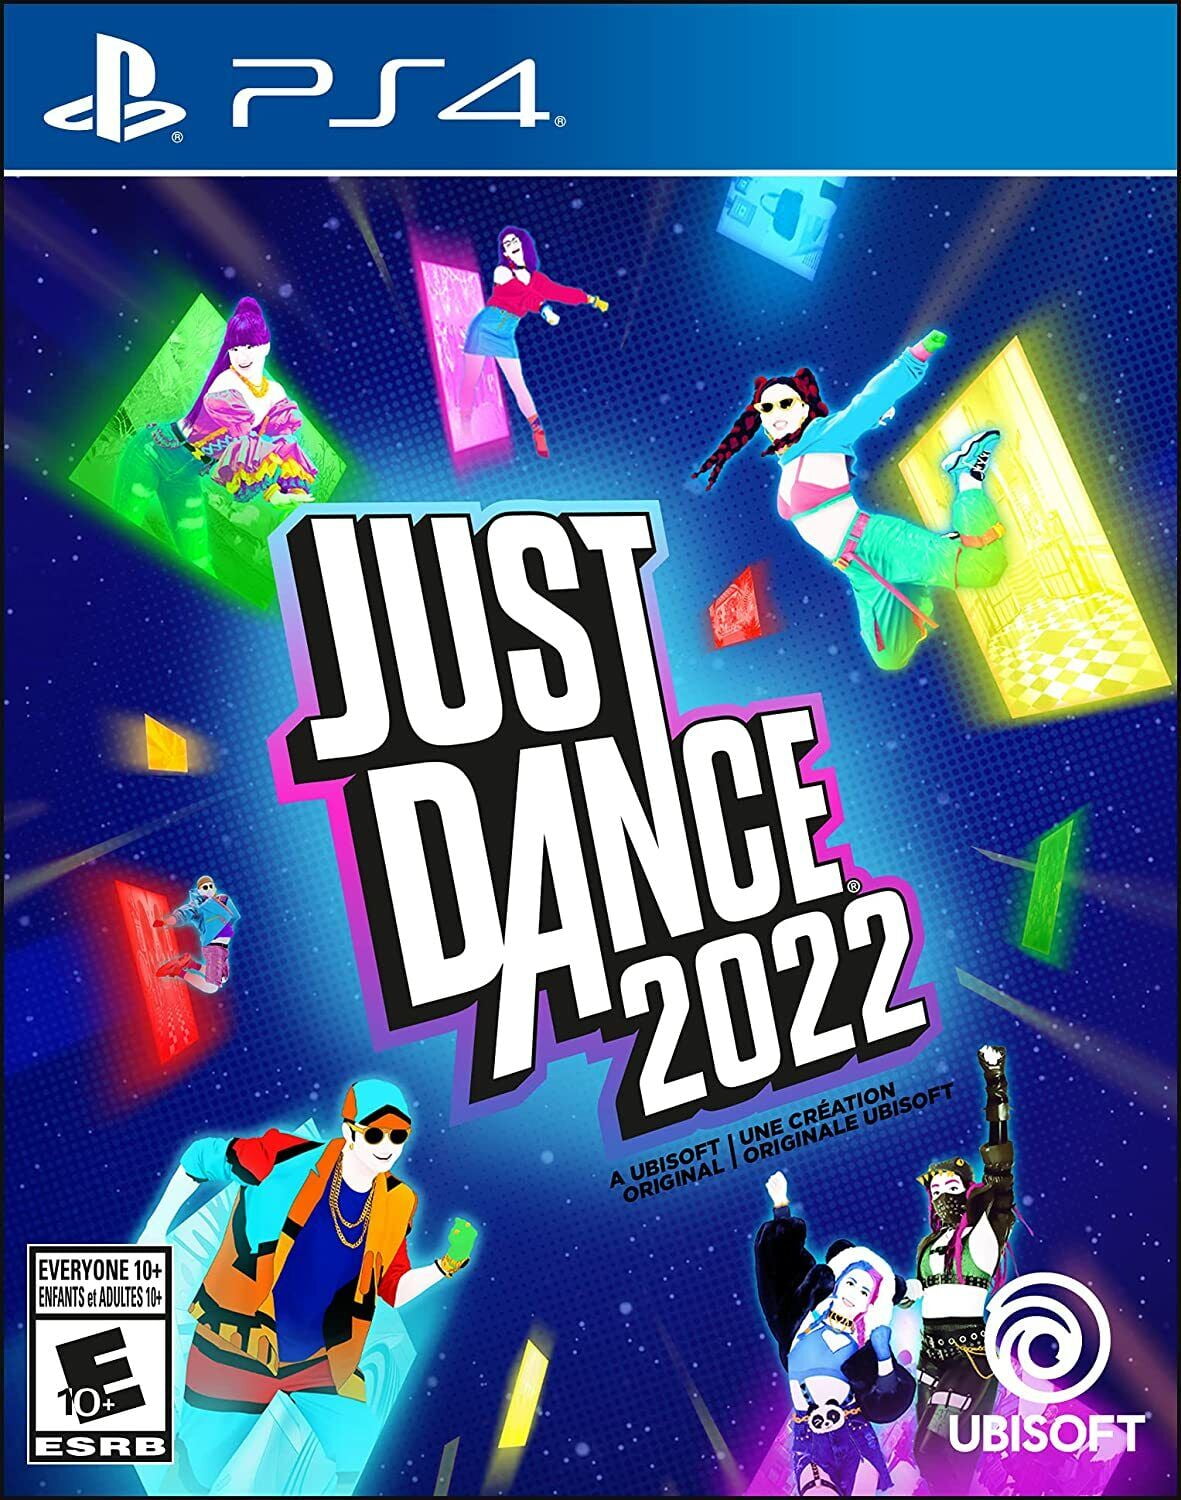 Just 2022 - Ubisoft Multiplayer] NEW Dance Sony Fitness 4 [PS4 PlayStation